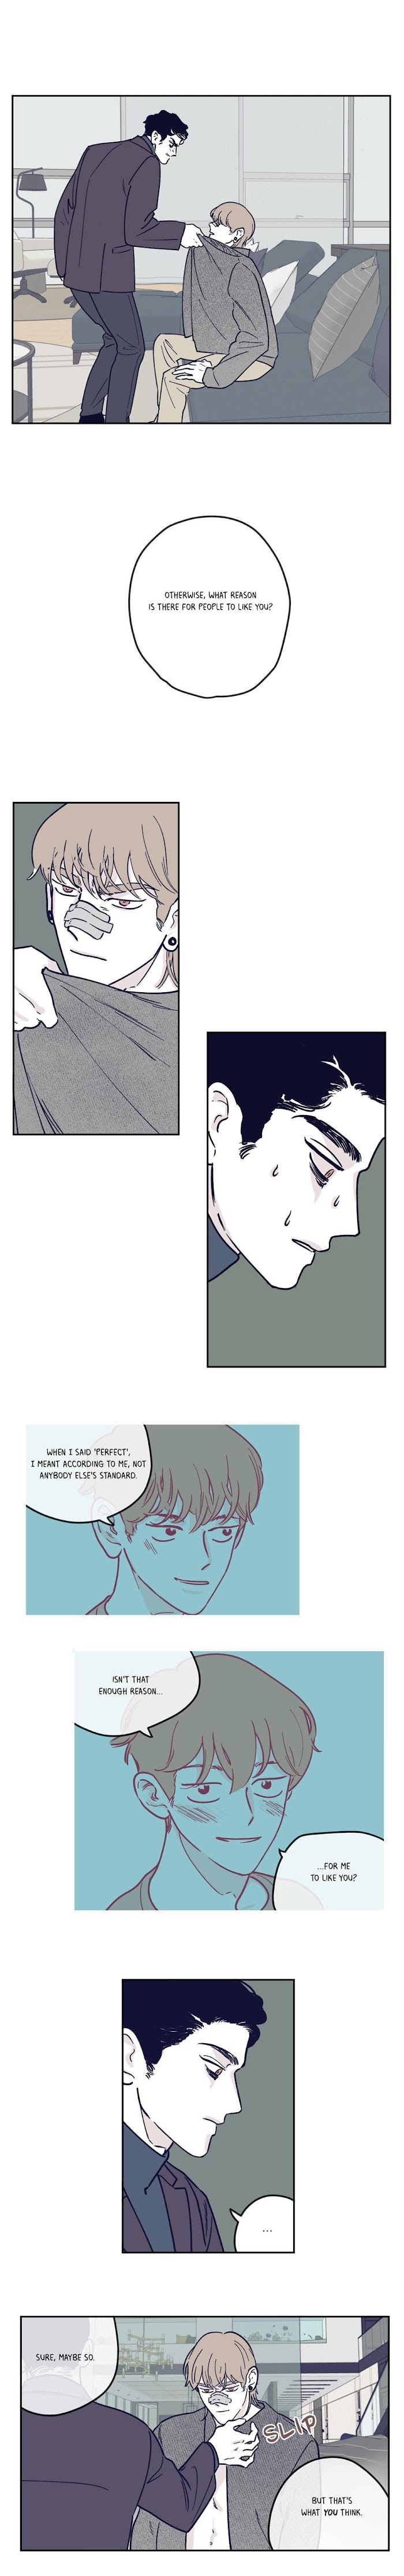 Mr. 100% Perfect - Page 1